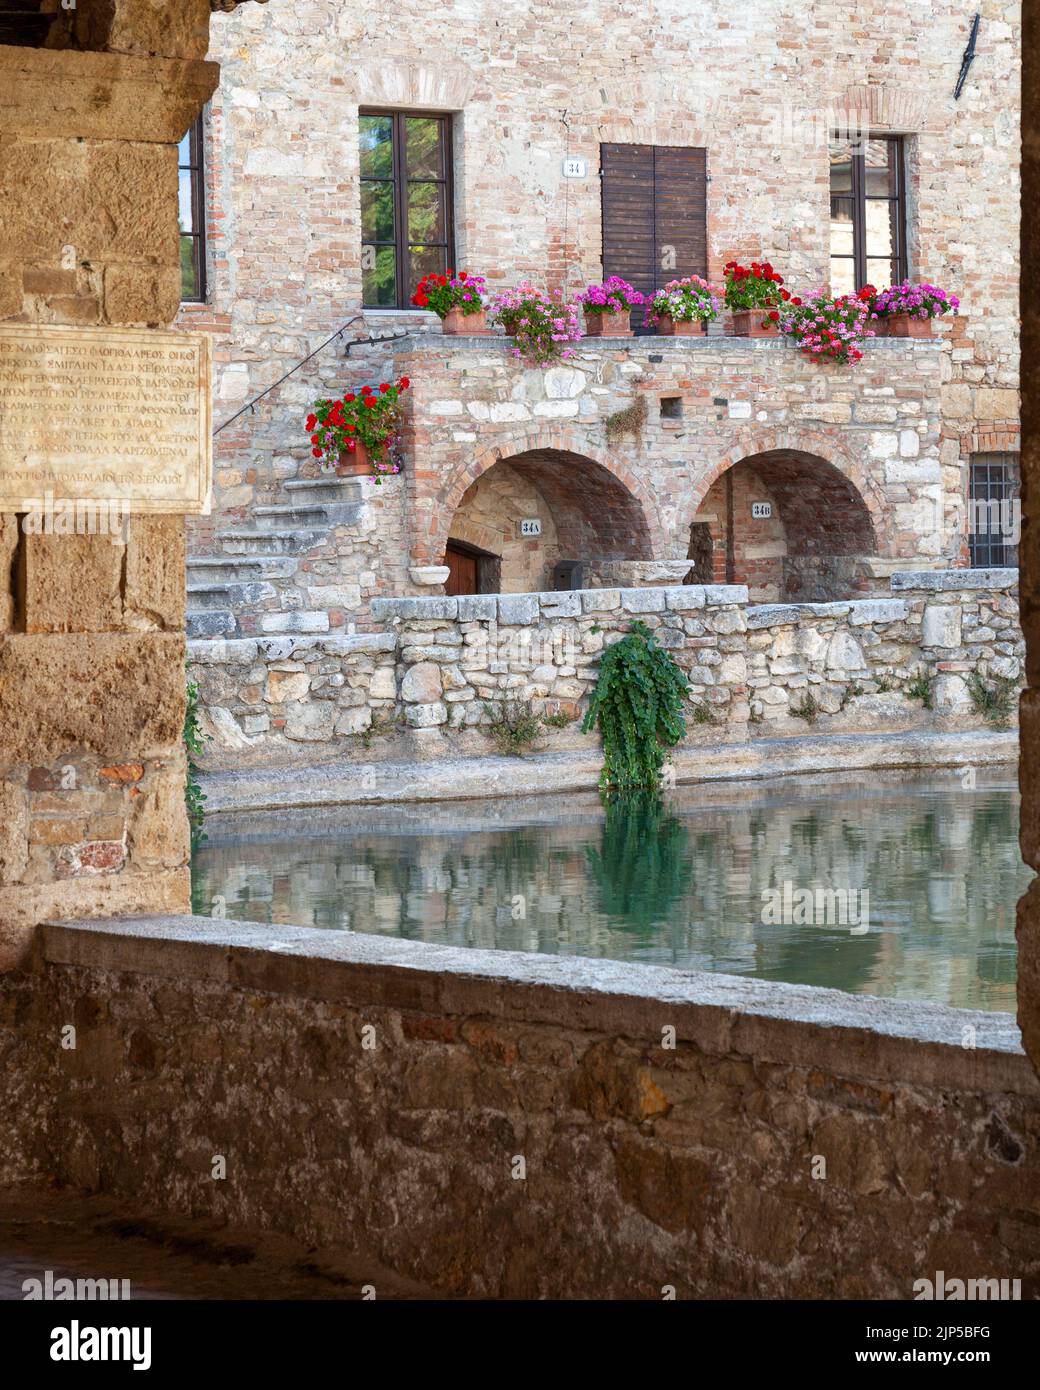 Thermal baths and guest rooms in Bagno Vignoni, Tuscany, Italy Stock Photo